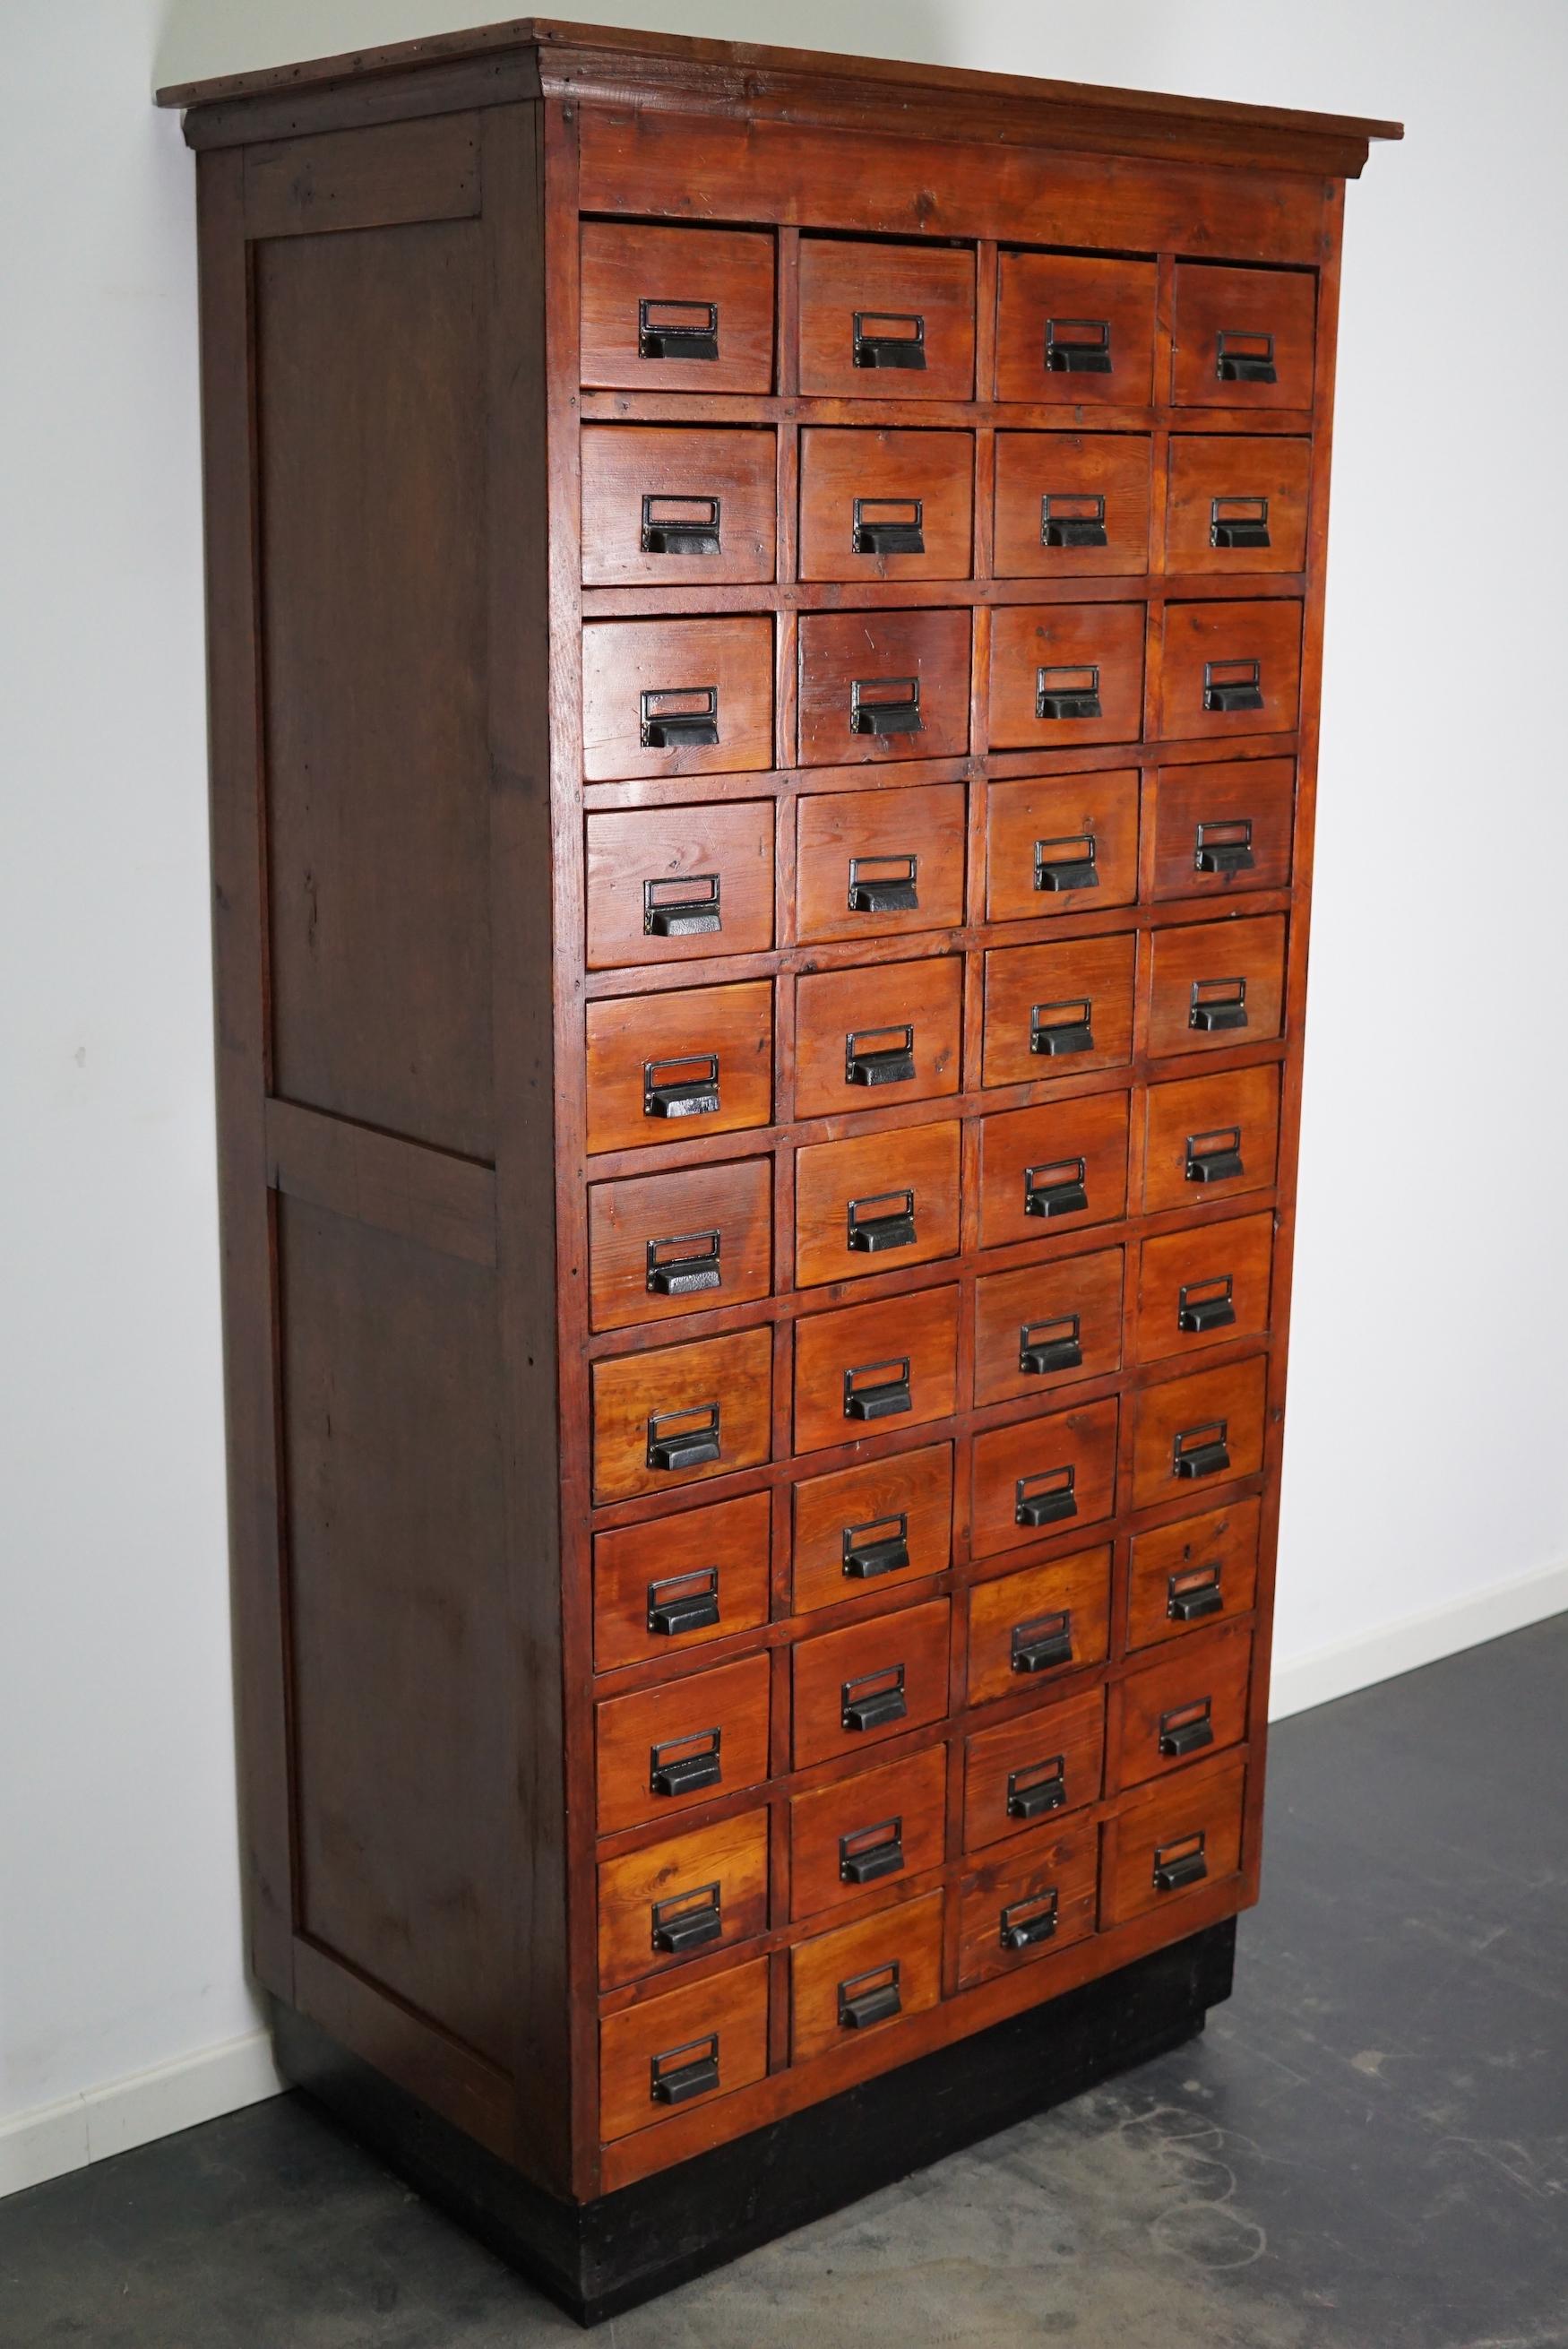 This apothecary cabinet was made circa 1950s in Germany. It features 44 drawers with nice black metal handles. It is made from pine and it remains in a good condition. The interior dimensions of the drawers are: D x W x H: 38 x 16 x 7 / 11 cm.